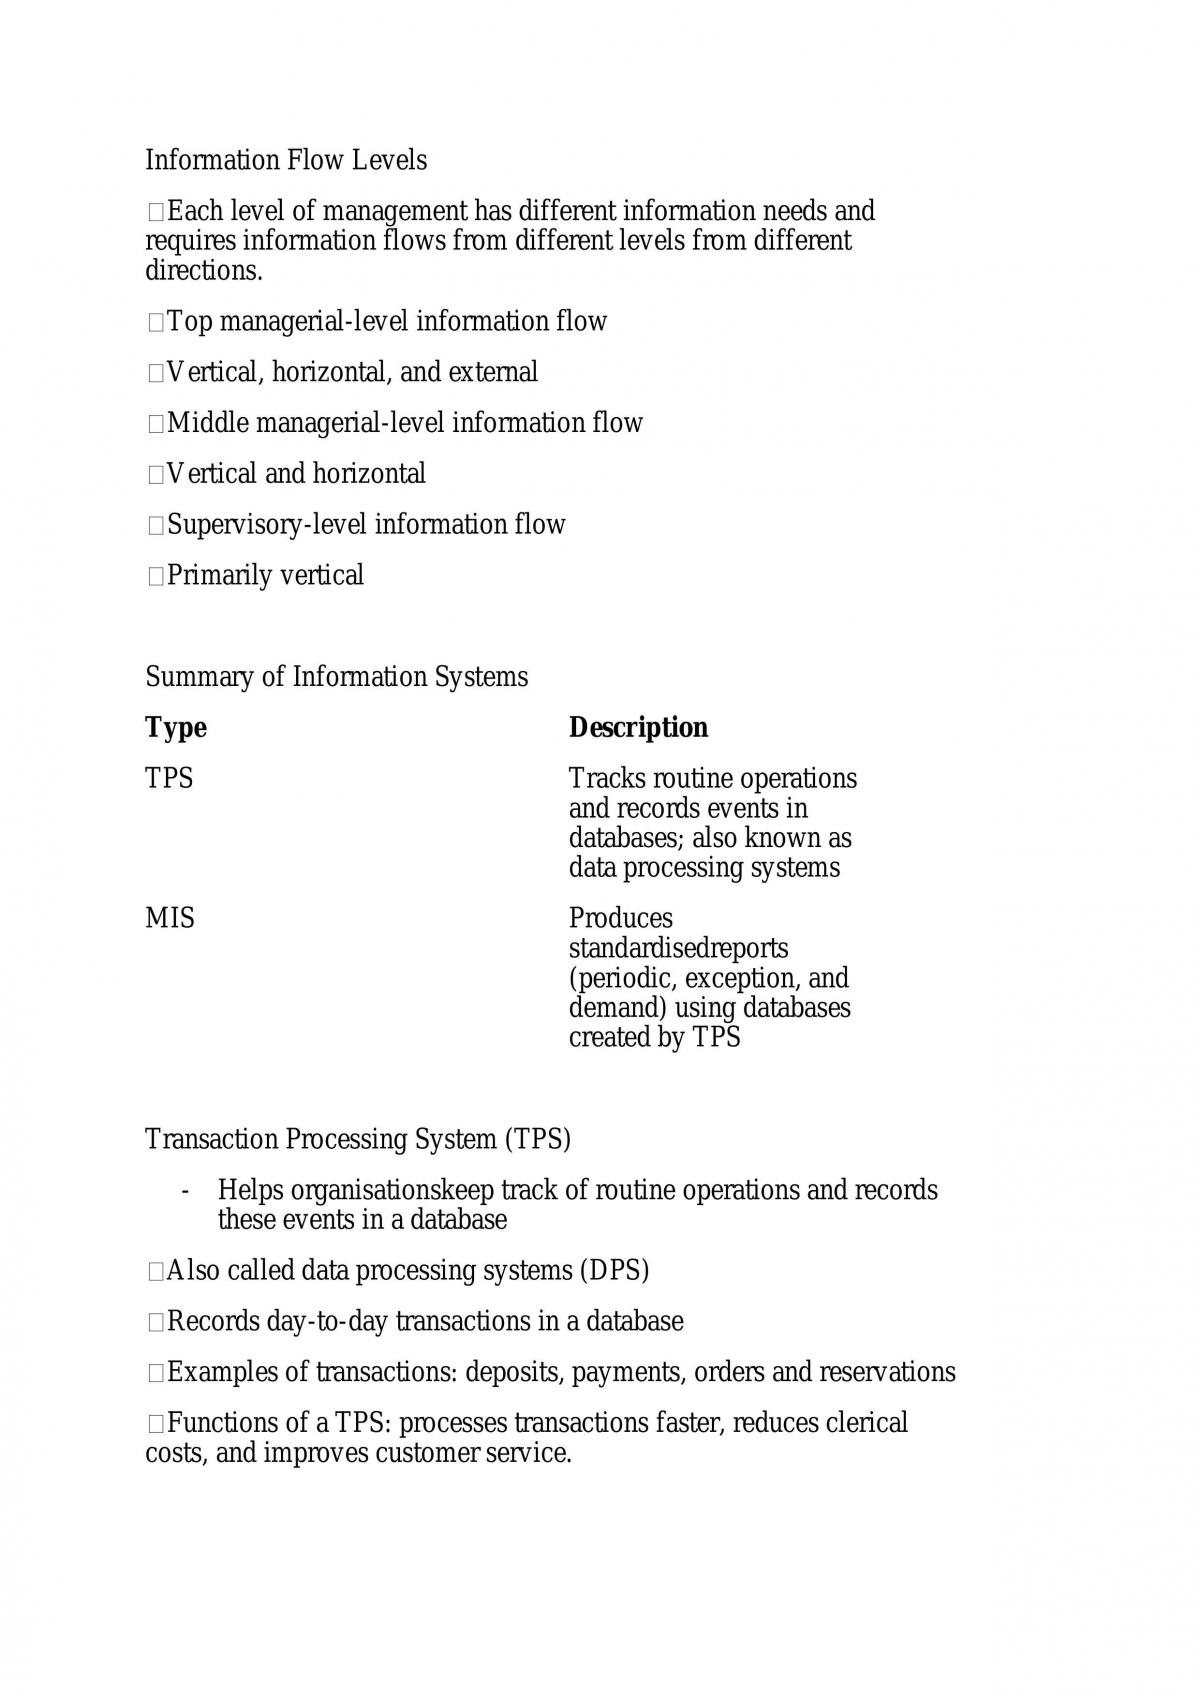 Computing Technology Full notes - Page 15